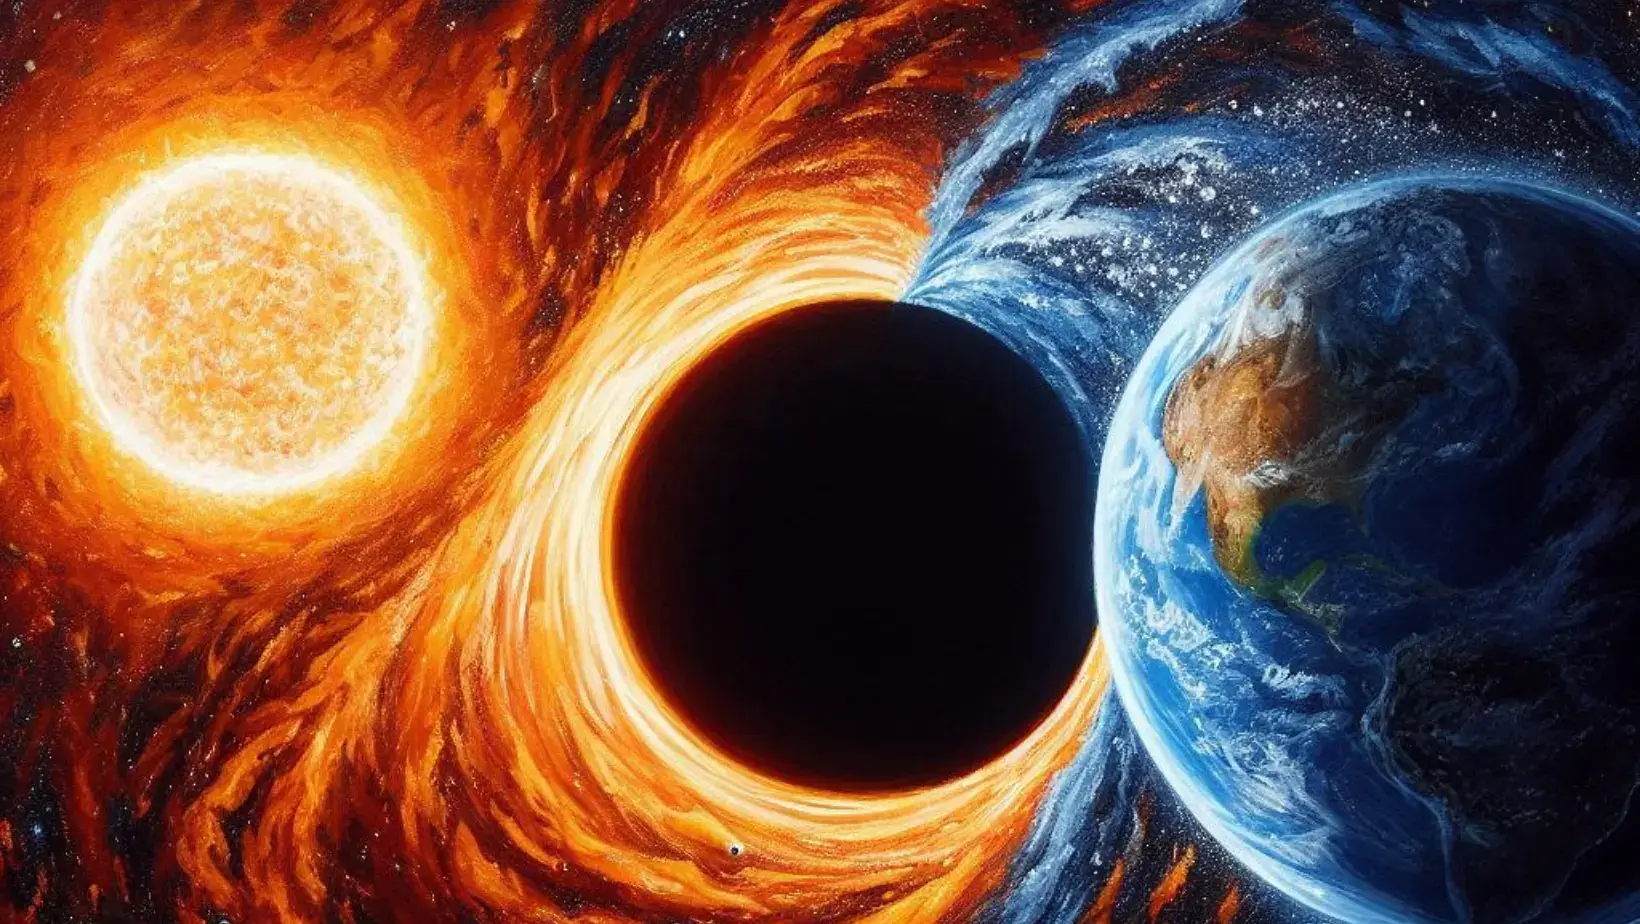 Artistic illustration of our earth facing a black hole